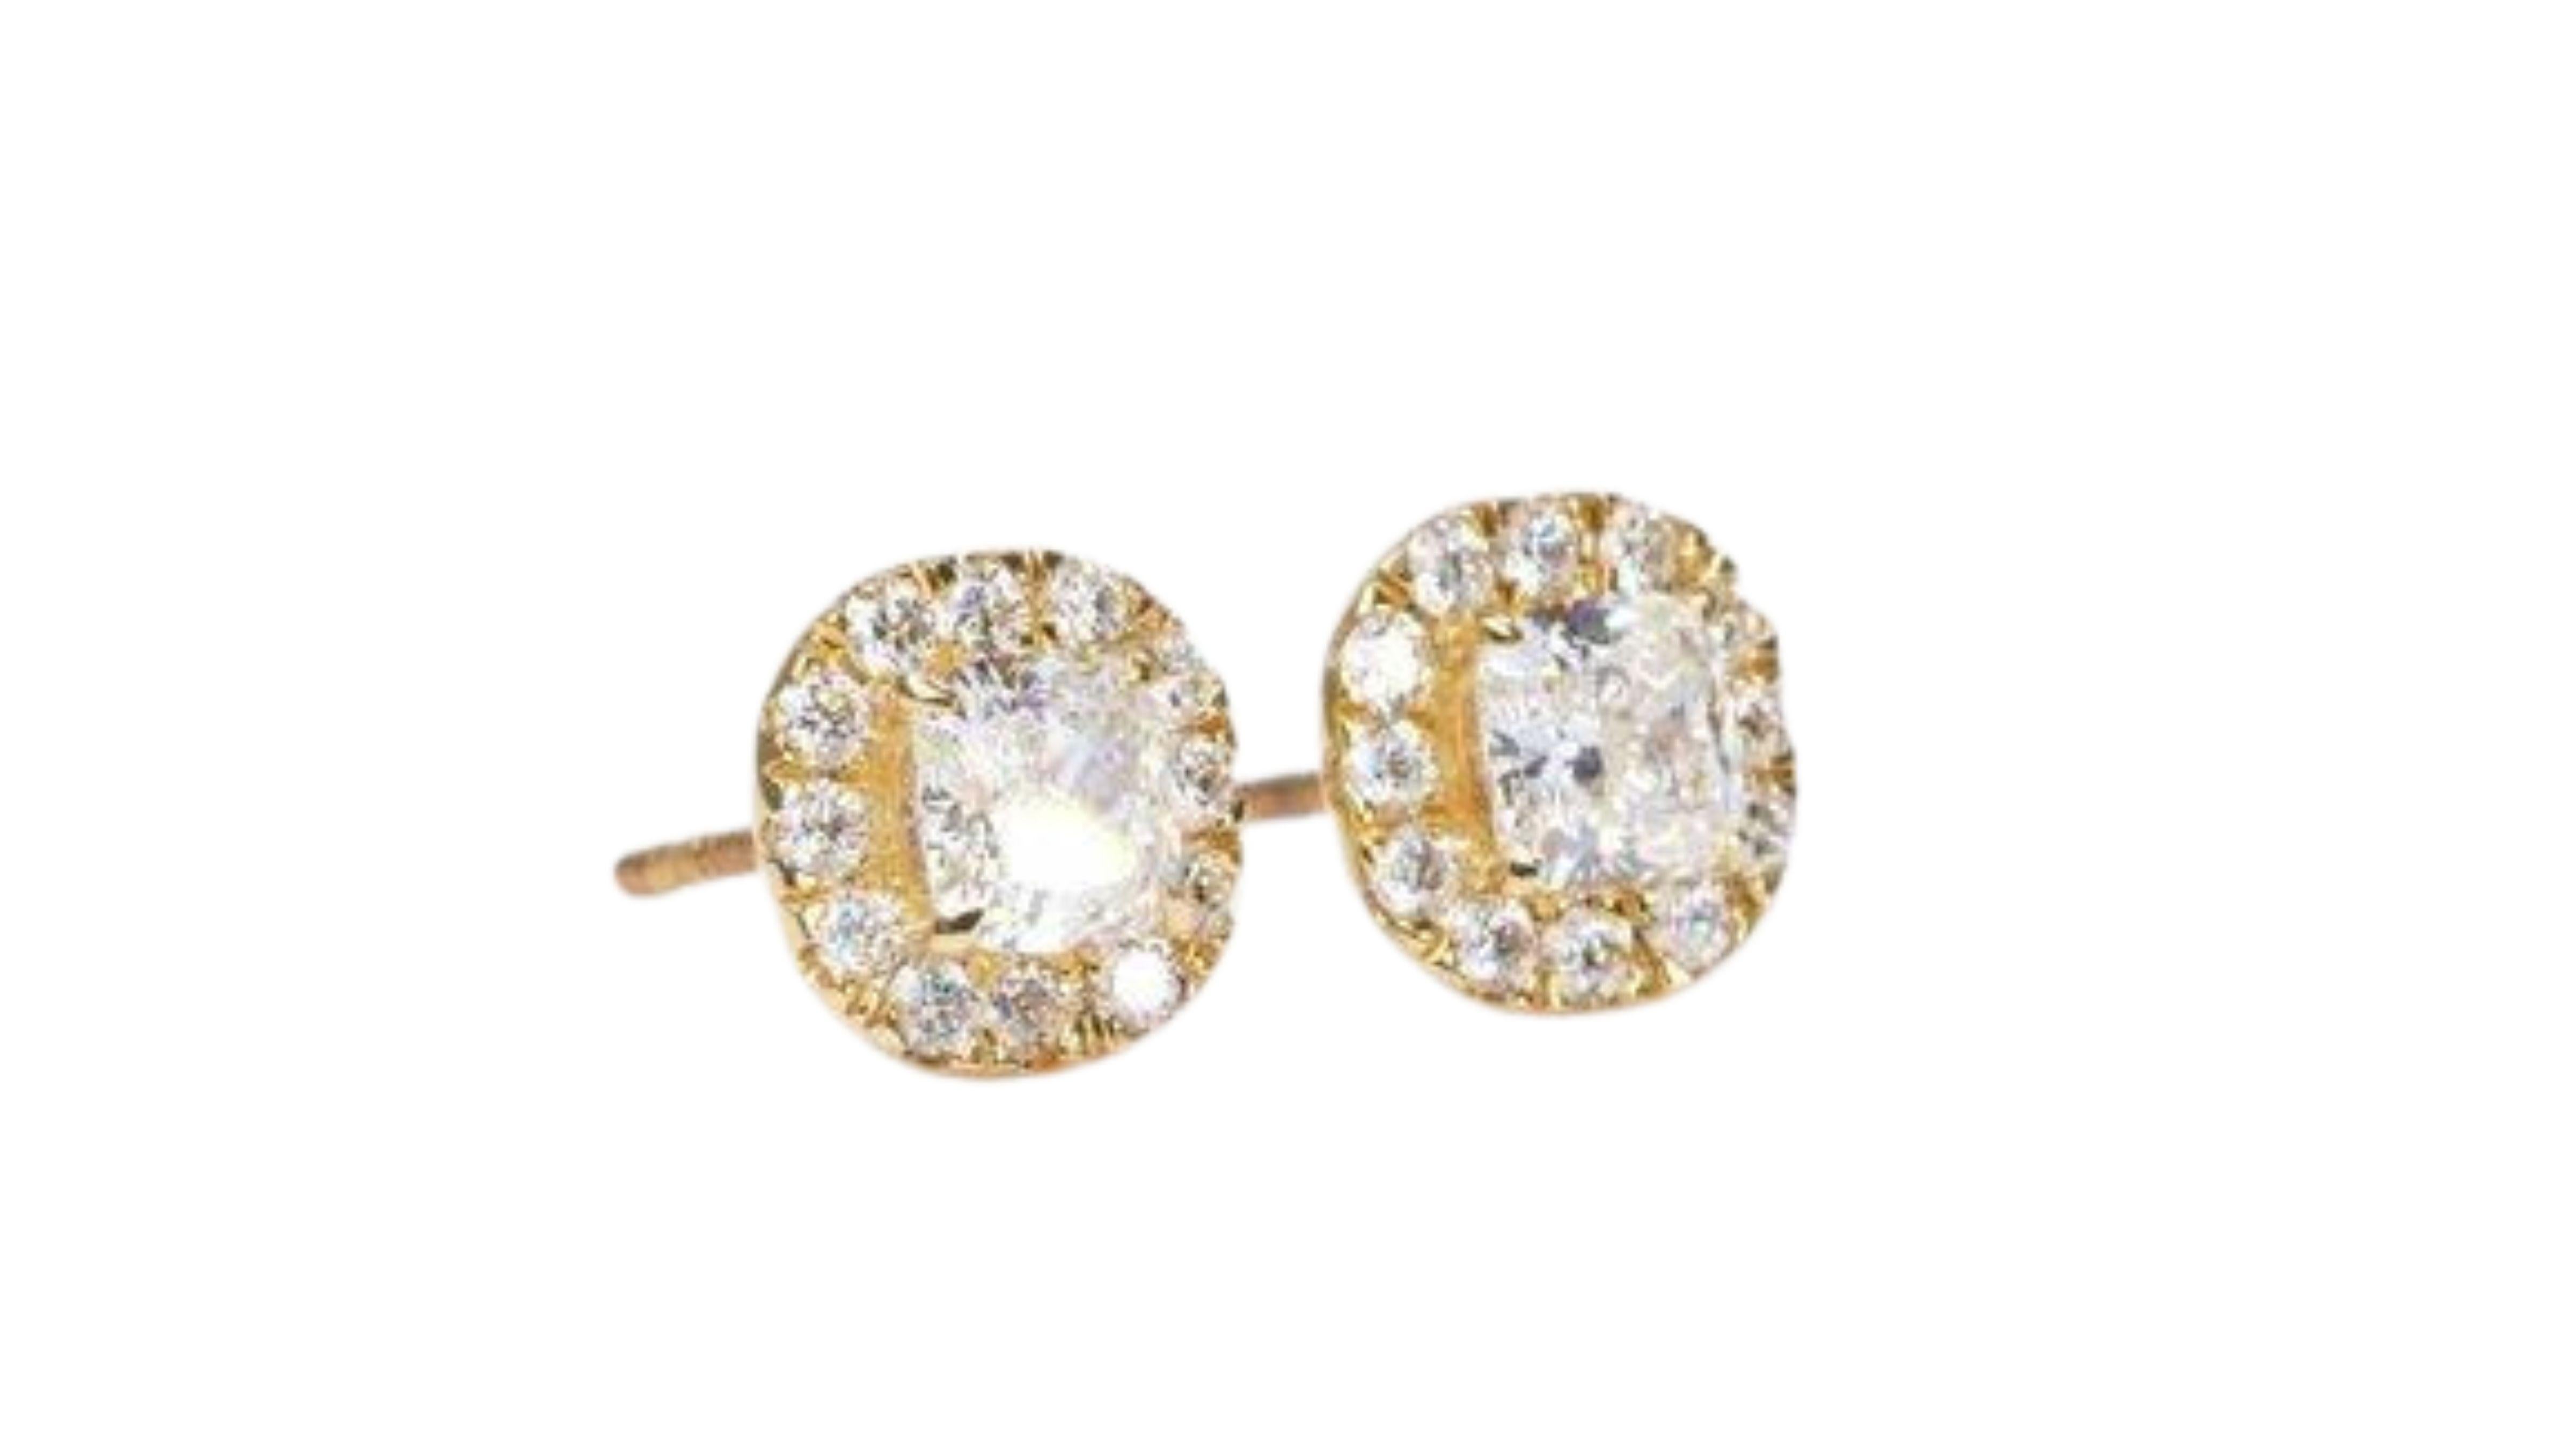 Sparkling 18k Yellow Gold Stud Earrings with 1.27 Ct Natural Diamonds, Aig Cert In New Condition For Sale In רמת גן, IL